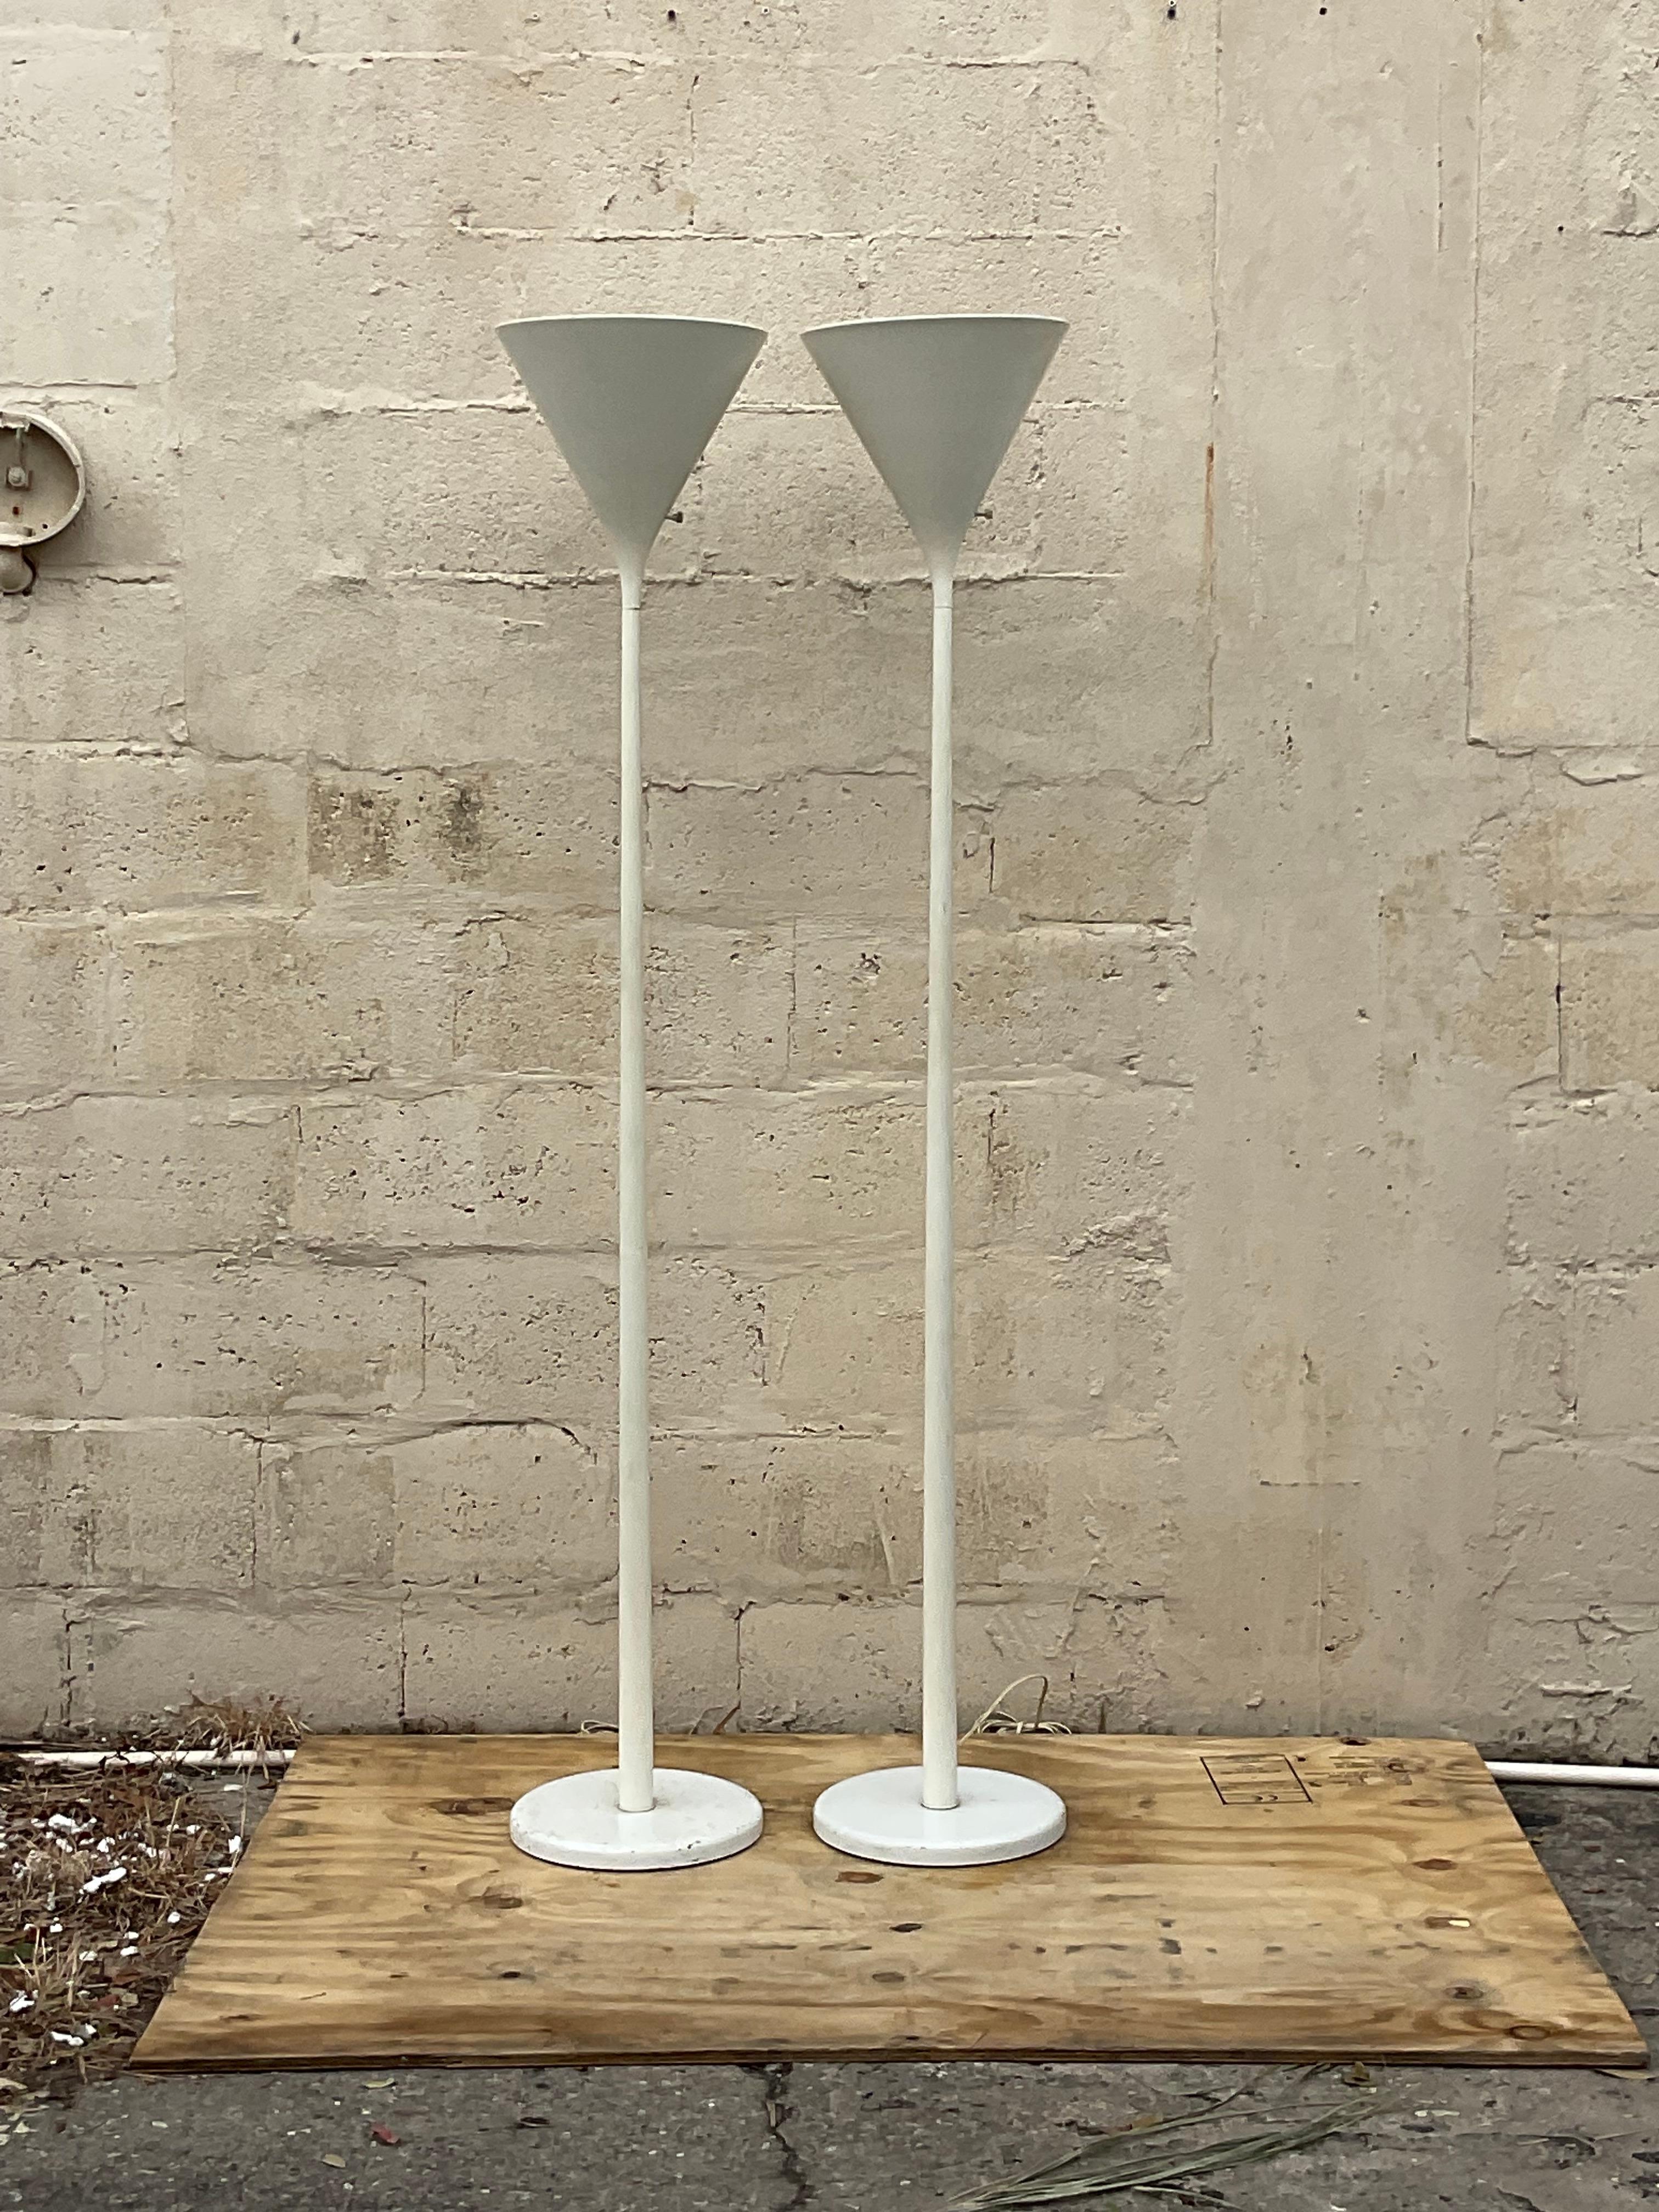 American Vintage Boho Signed Nessen Cone Floor Lamps - a Pair For Sale